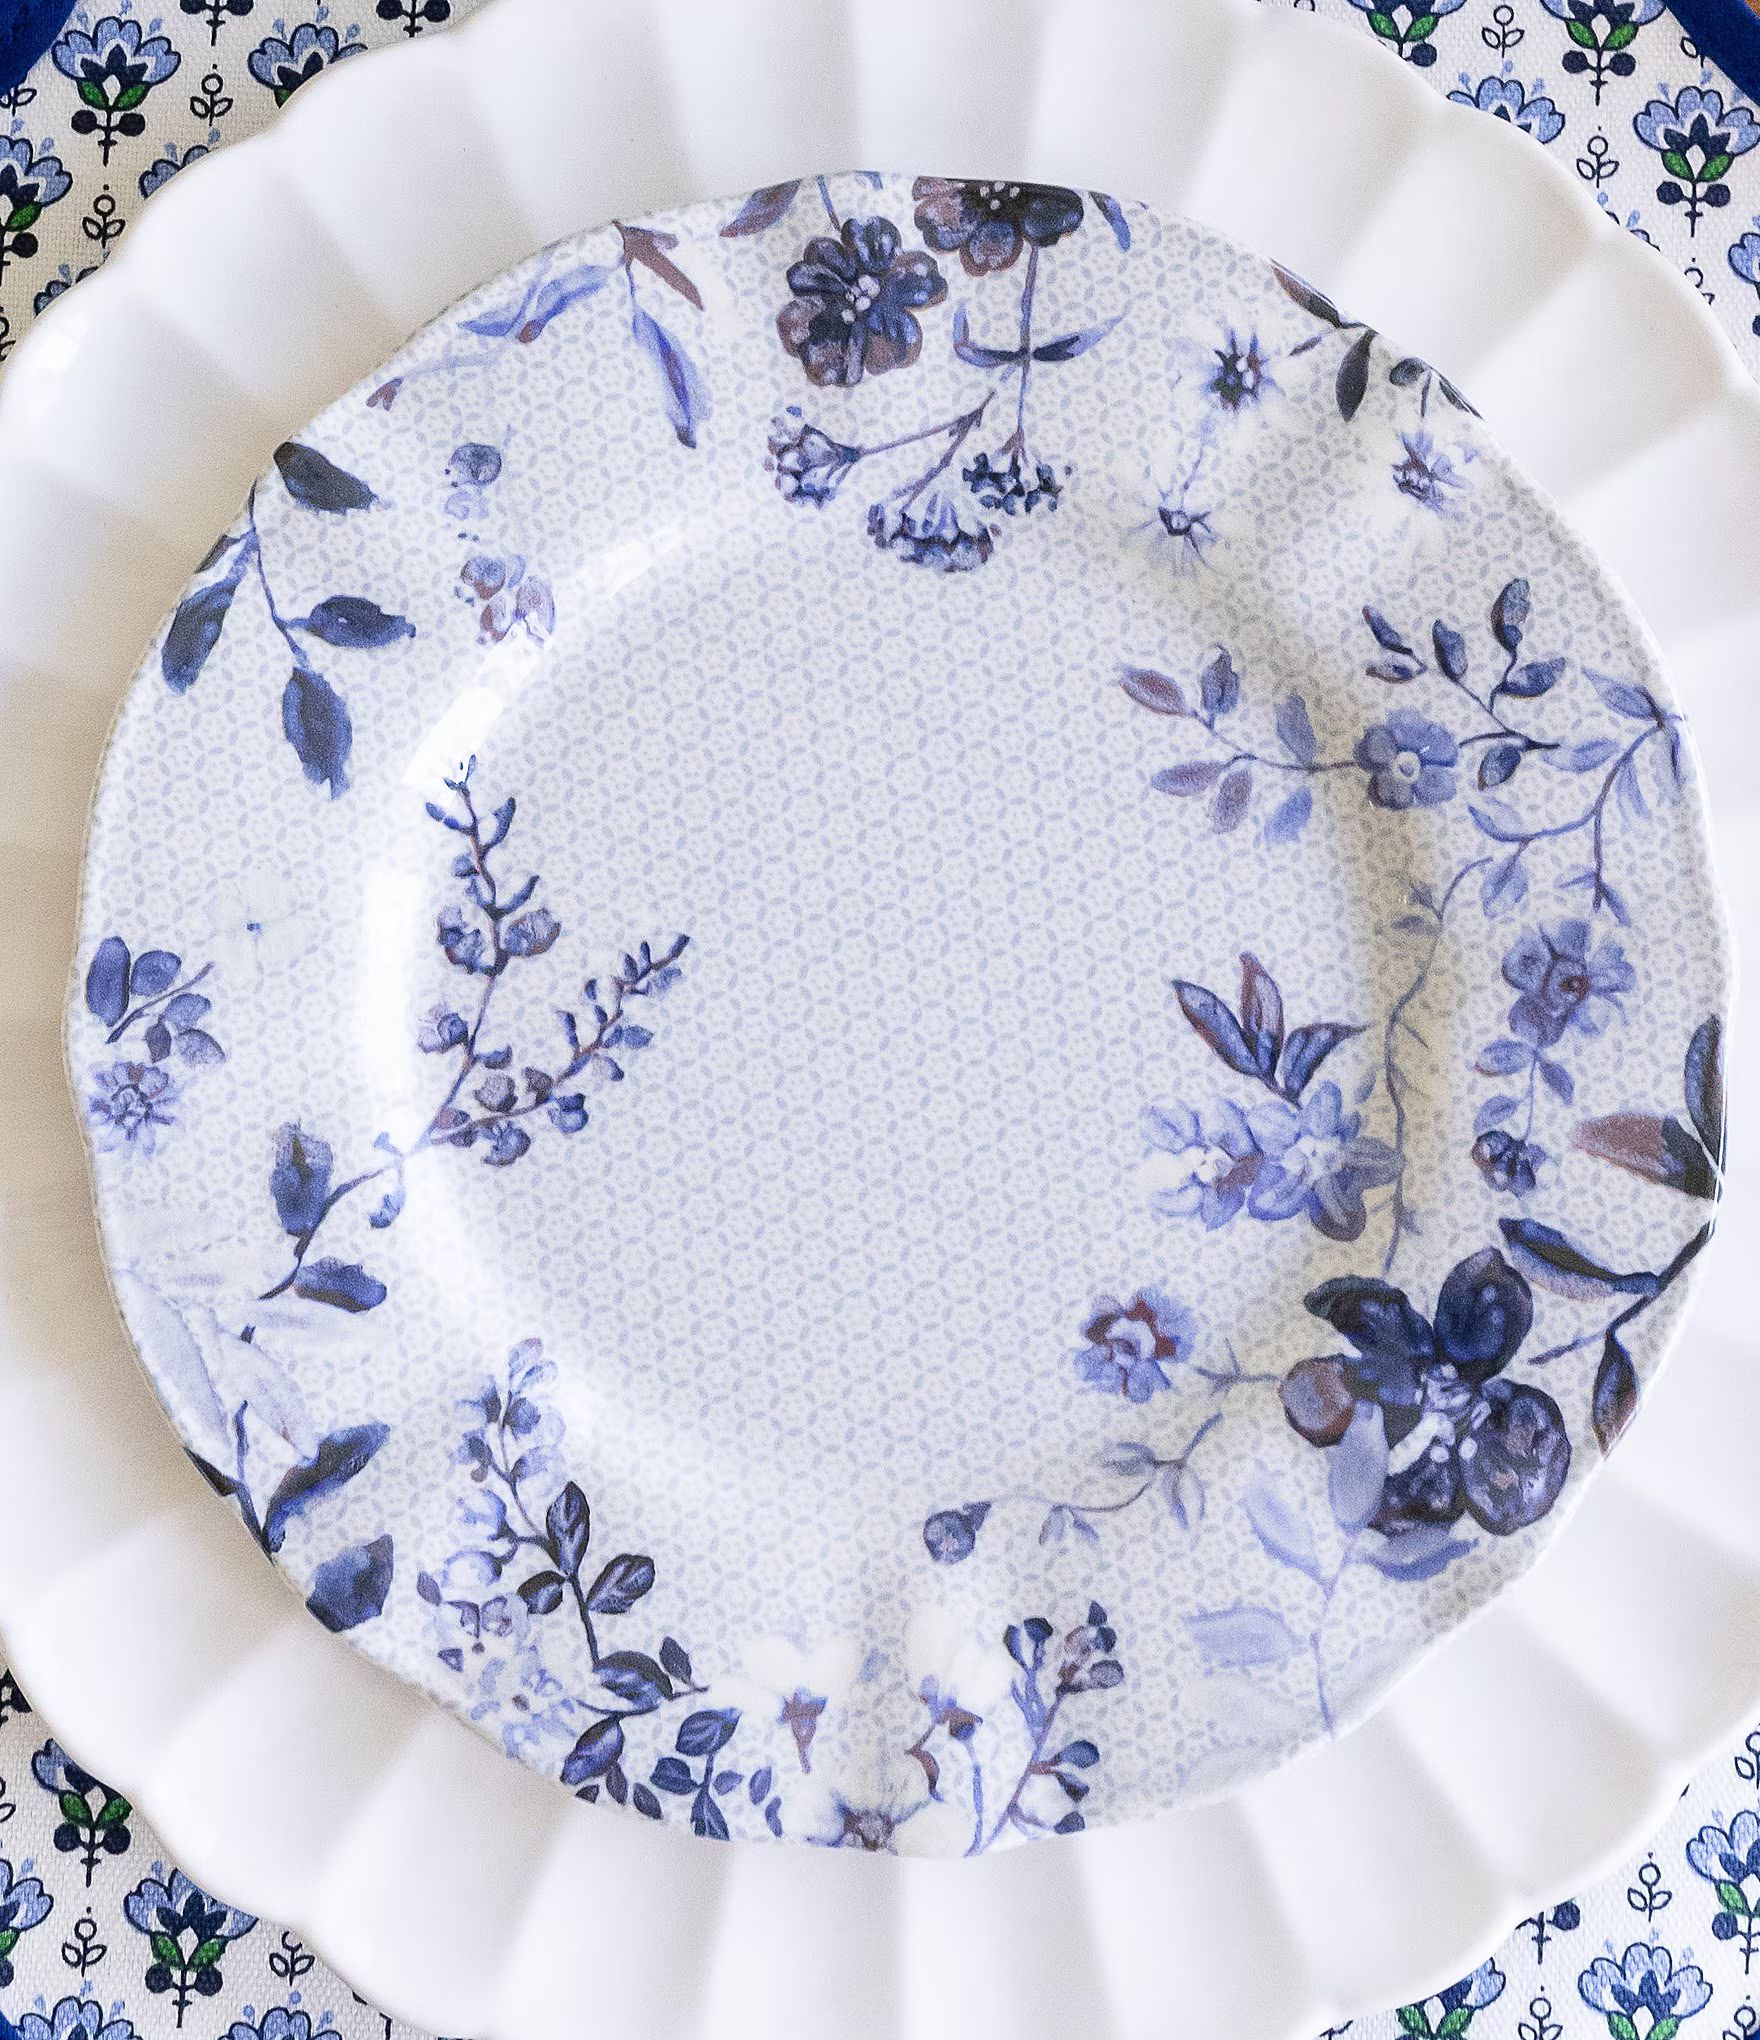 x Mrs. Southern Social White Floral Accent Salad Plate | Dillards